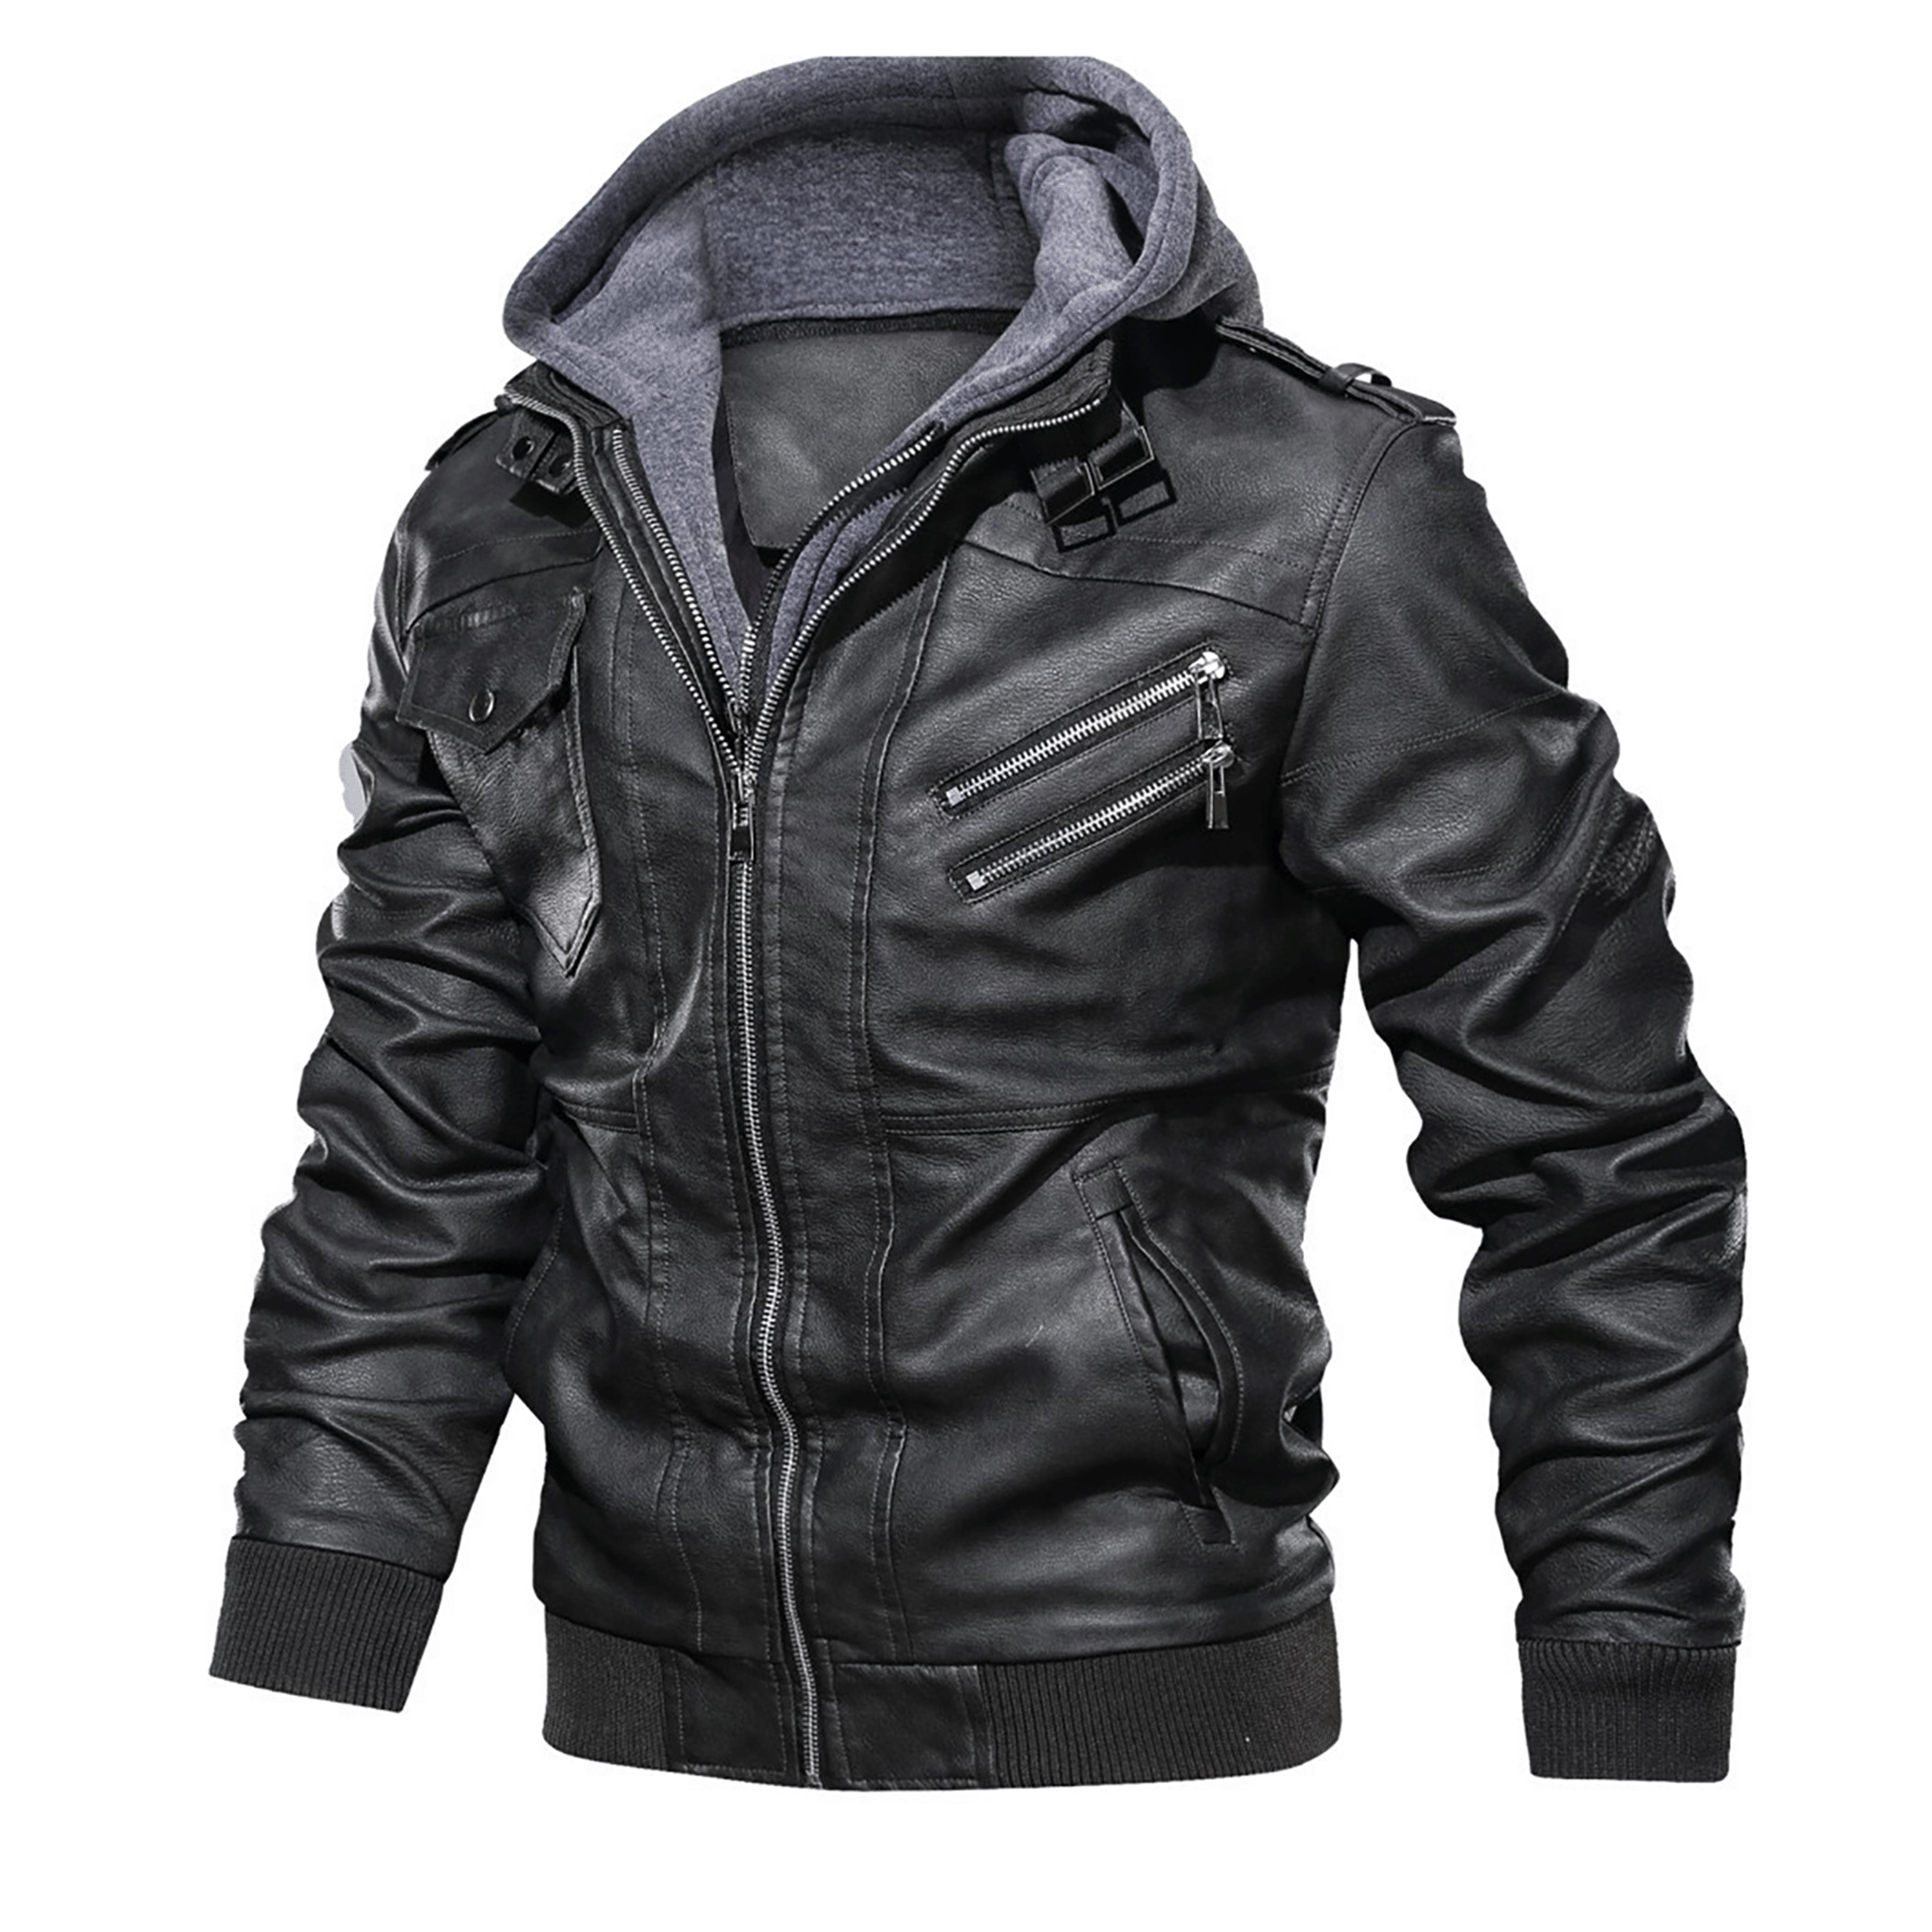 Top leather jackets and latest products 125